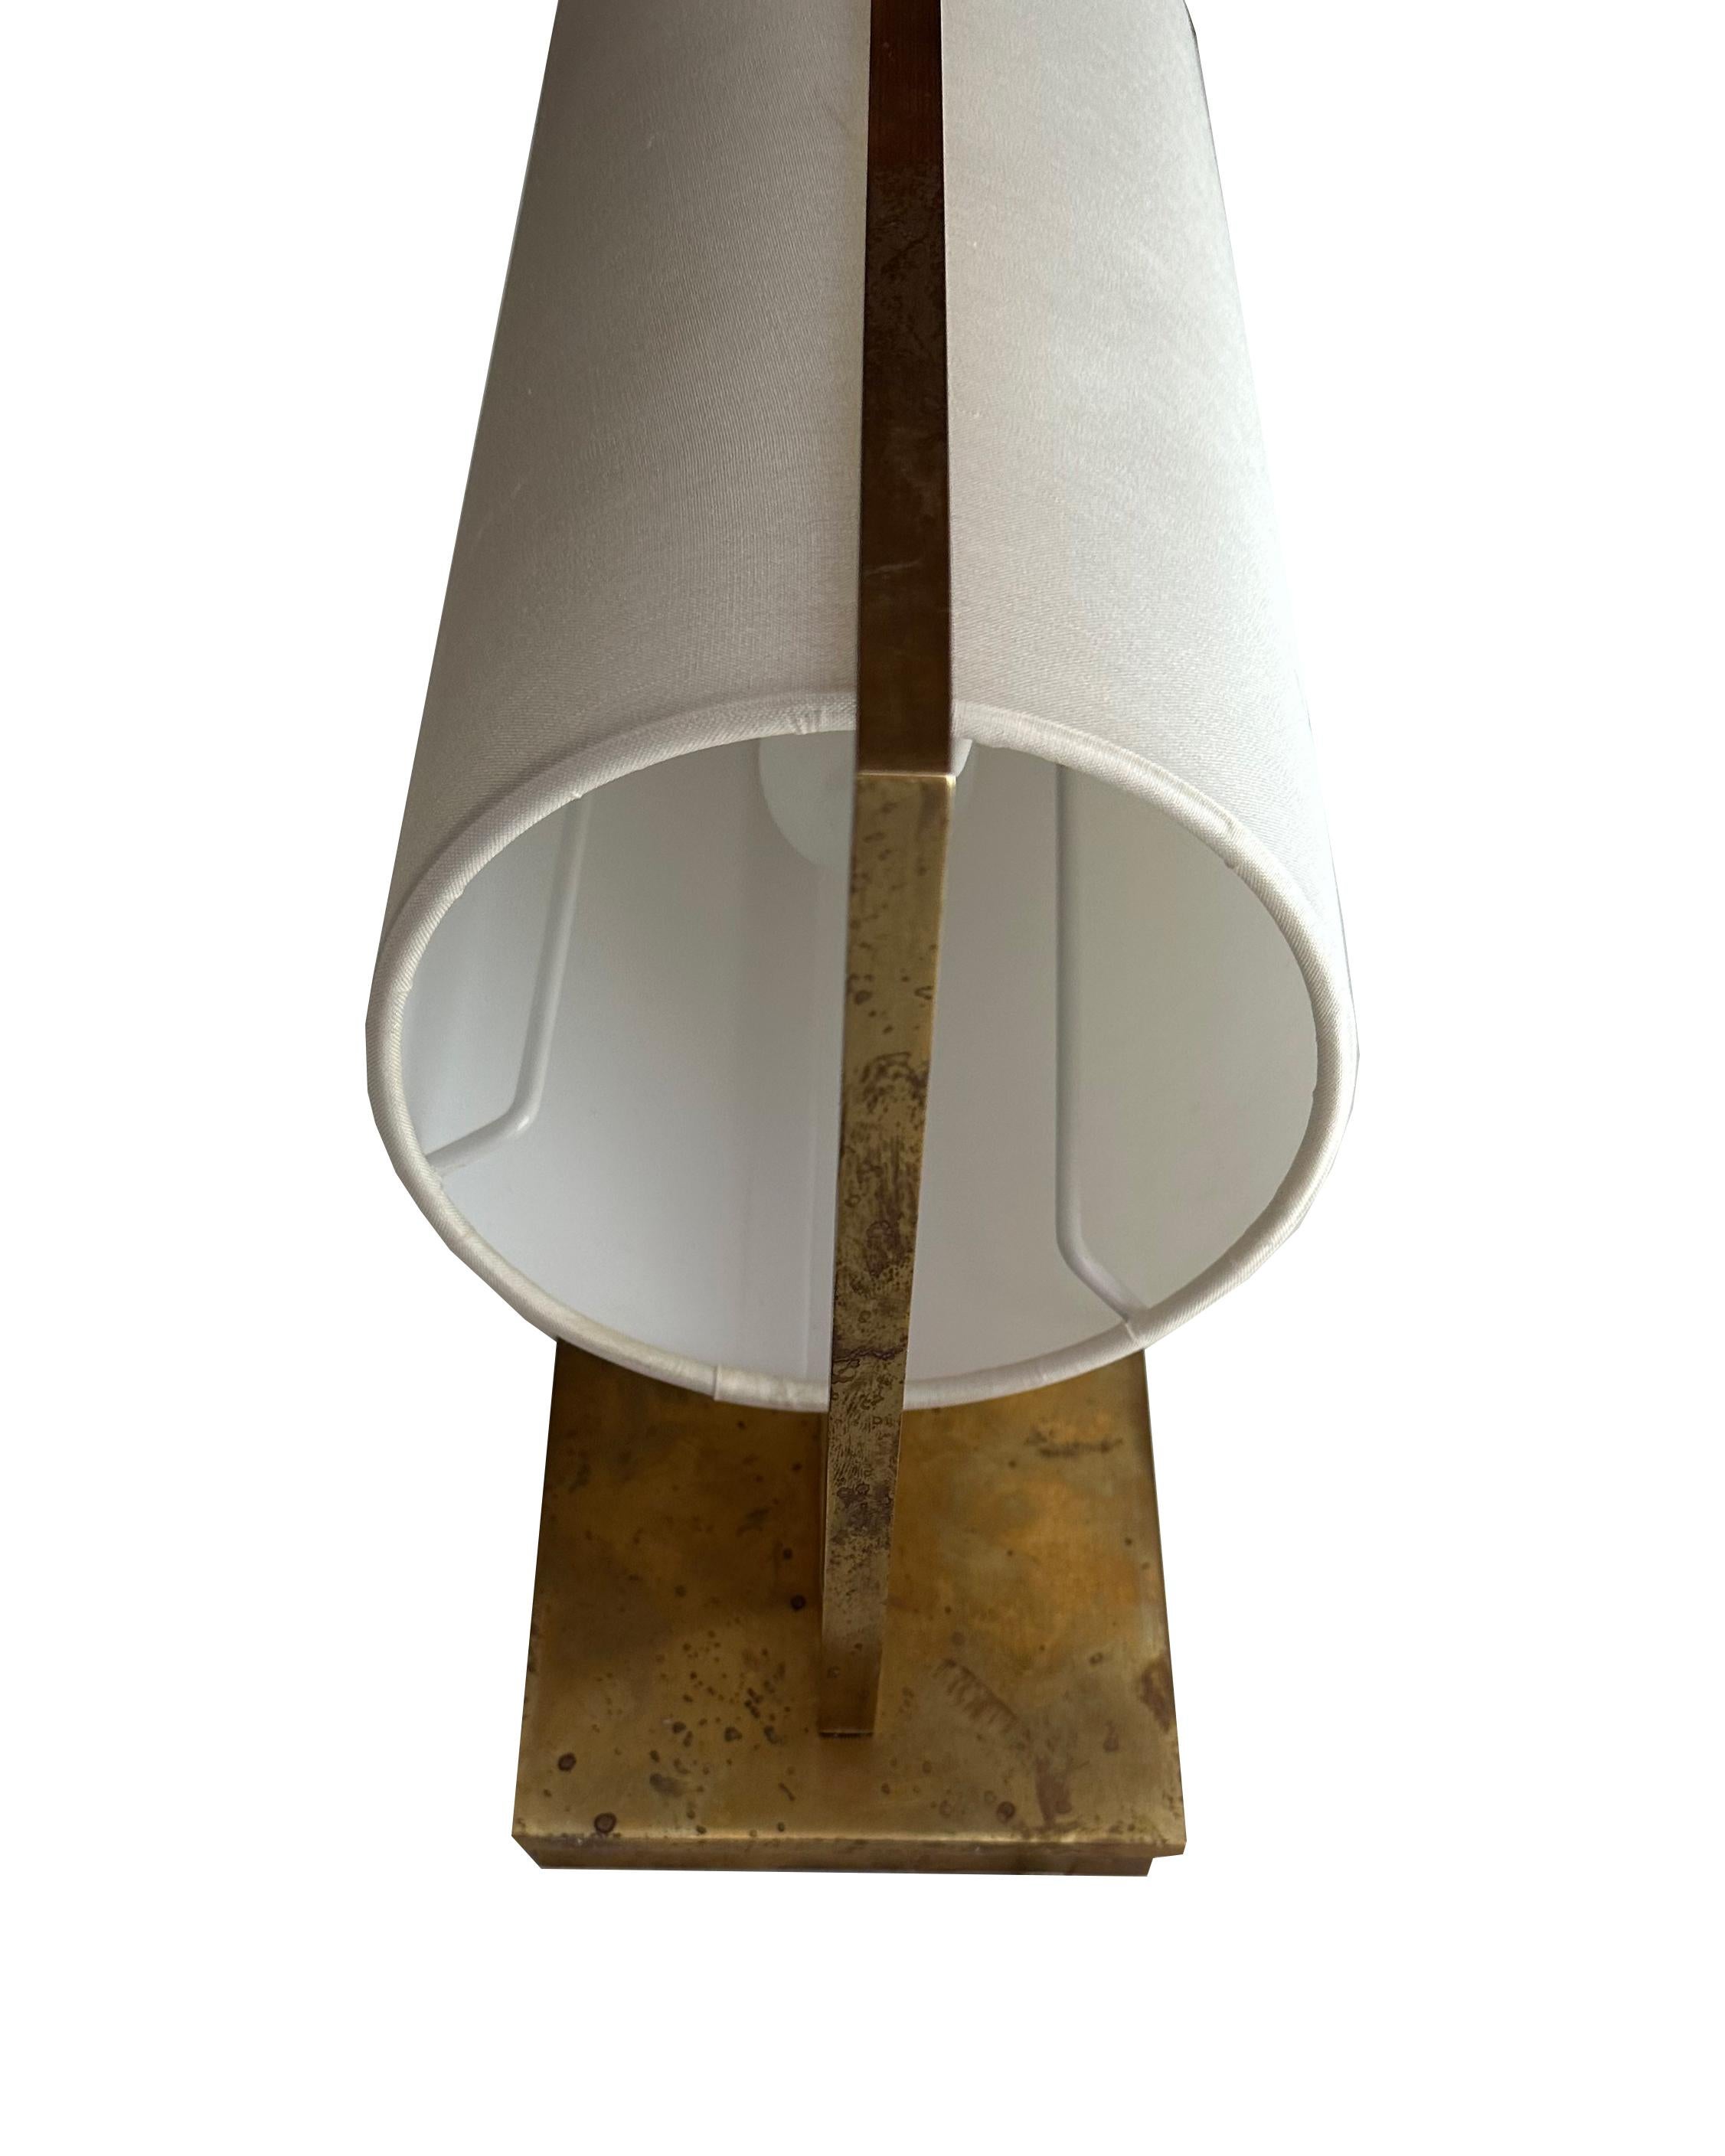 Introducing the pre-owned Visual Comfort Gold Sconces from designer Barbara Barry's Signature Collection. These Framework Sconces, with their perfect patina Soft Brass finish, exude elegance and sophistication. The perfect blend of timeless design